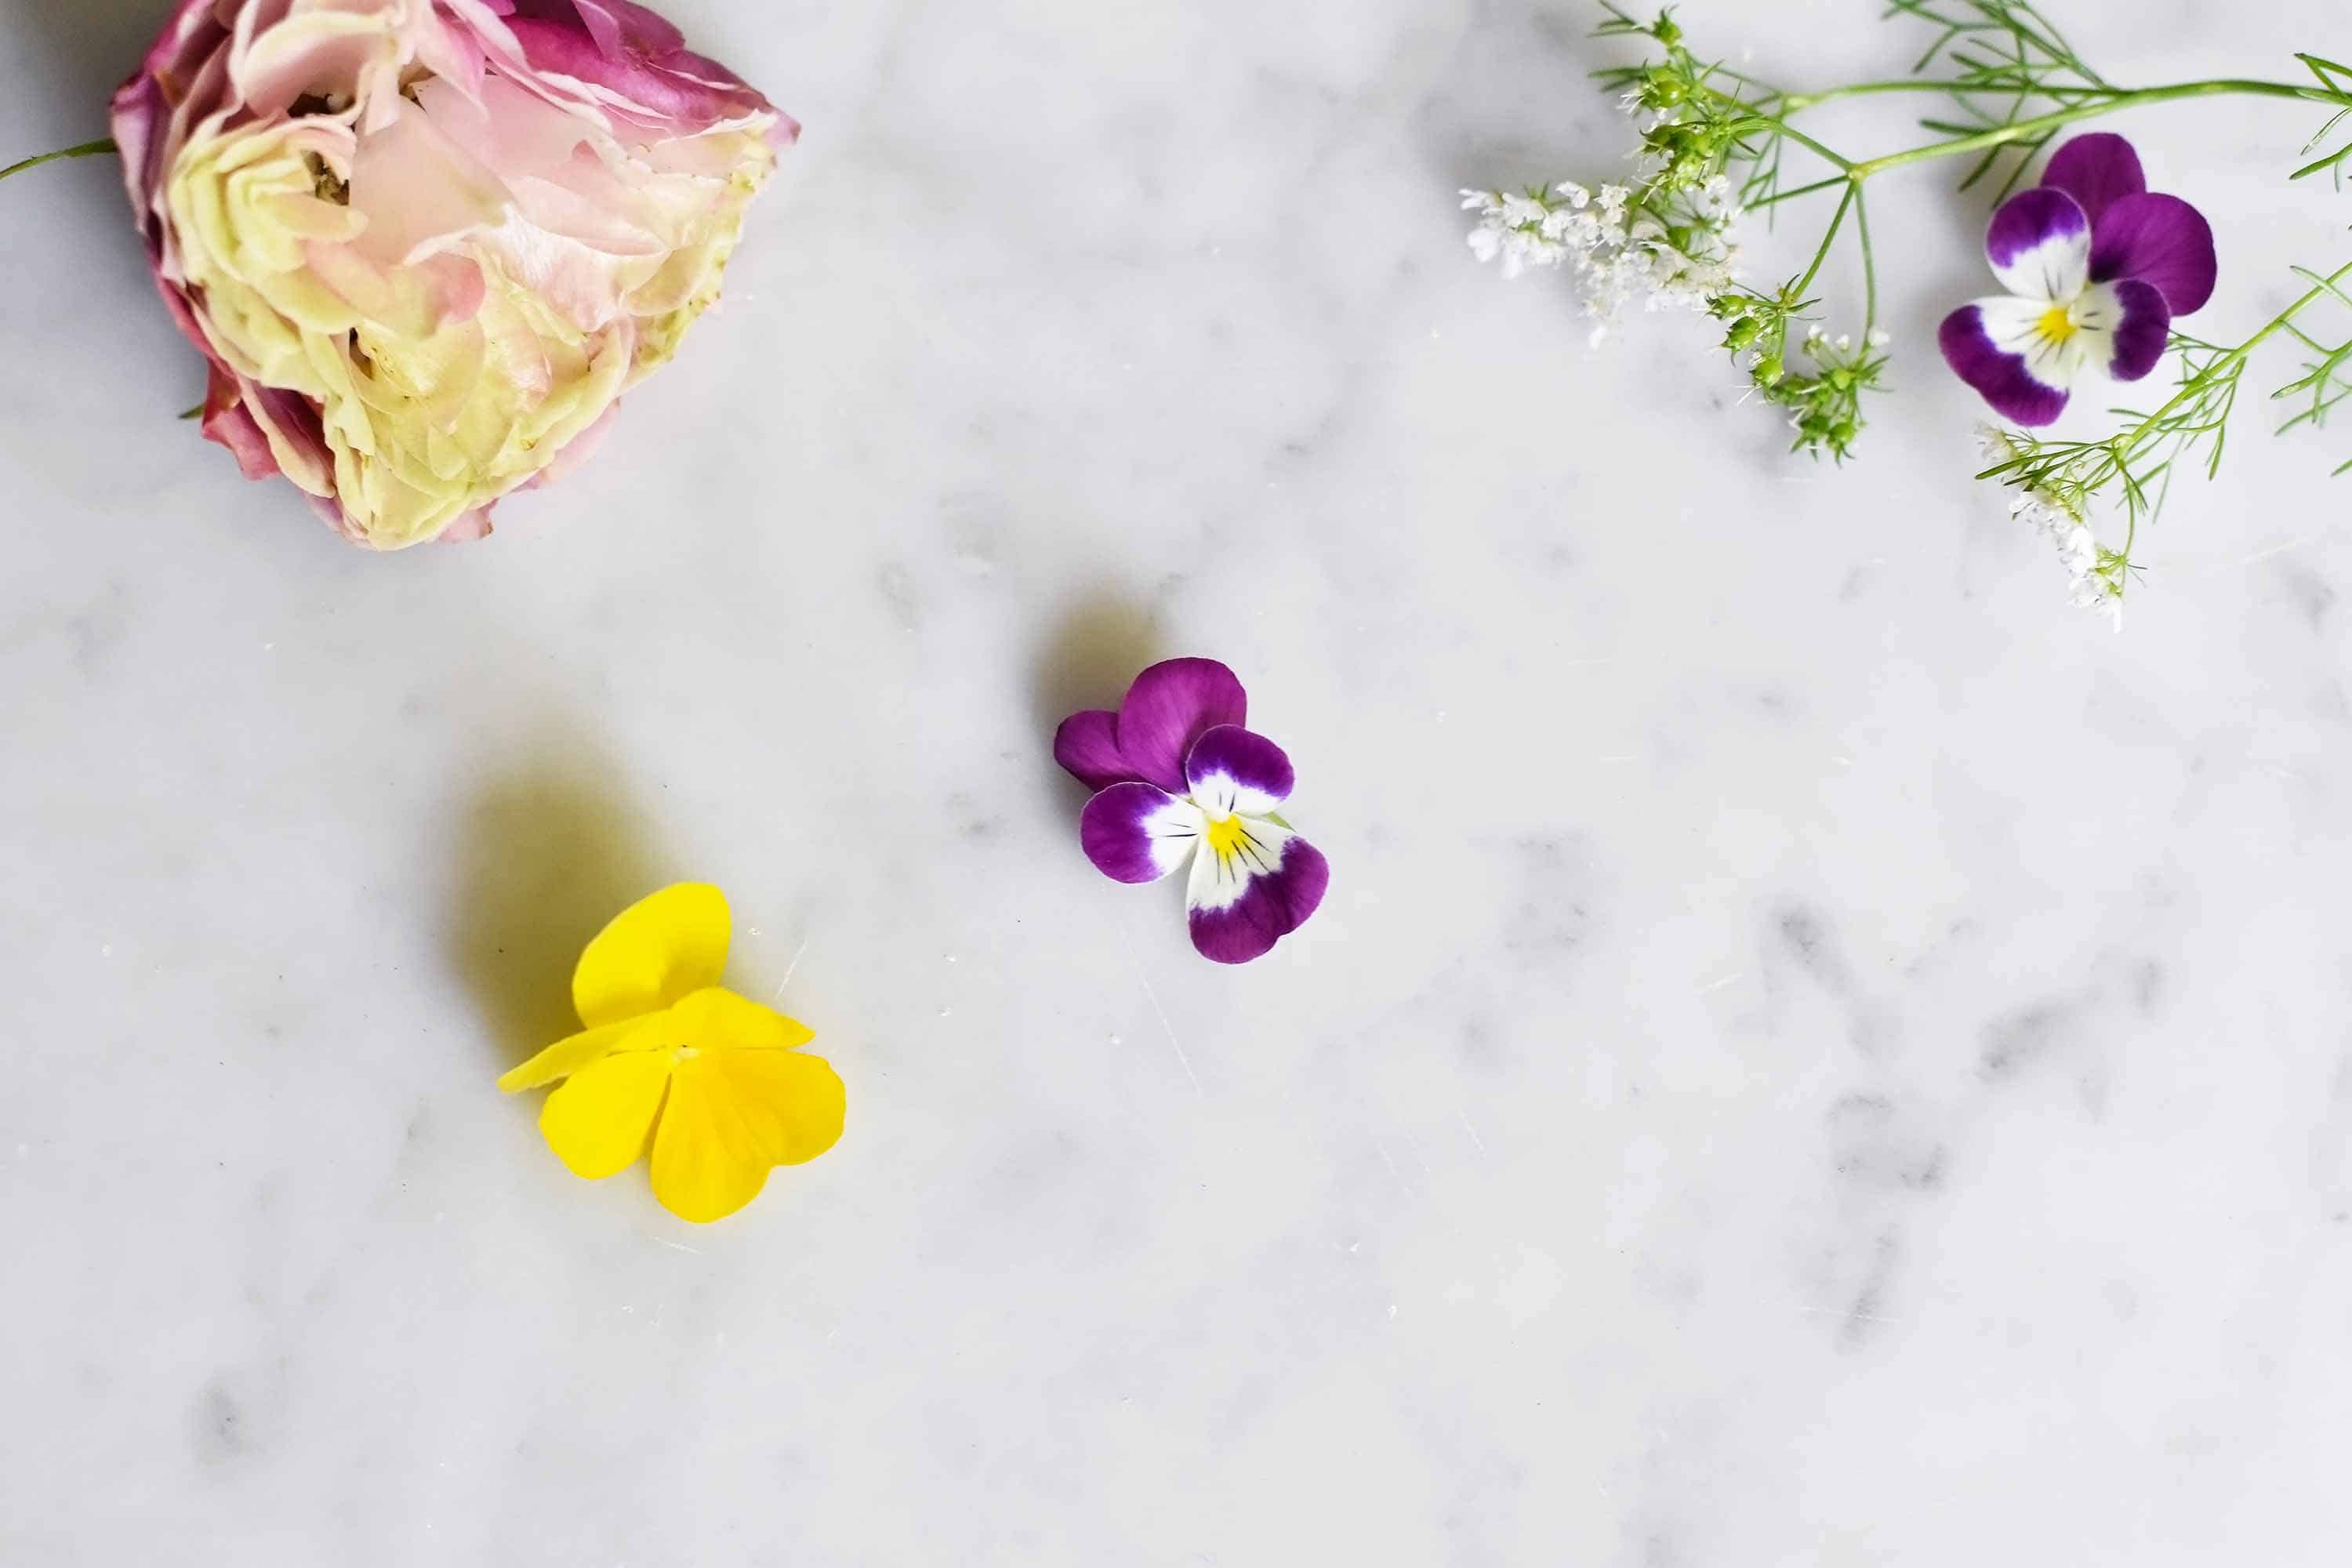 A Complete Guide to Edible Flowers for Drinks and Cocktails